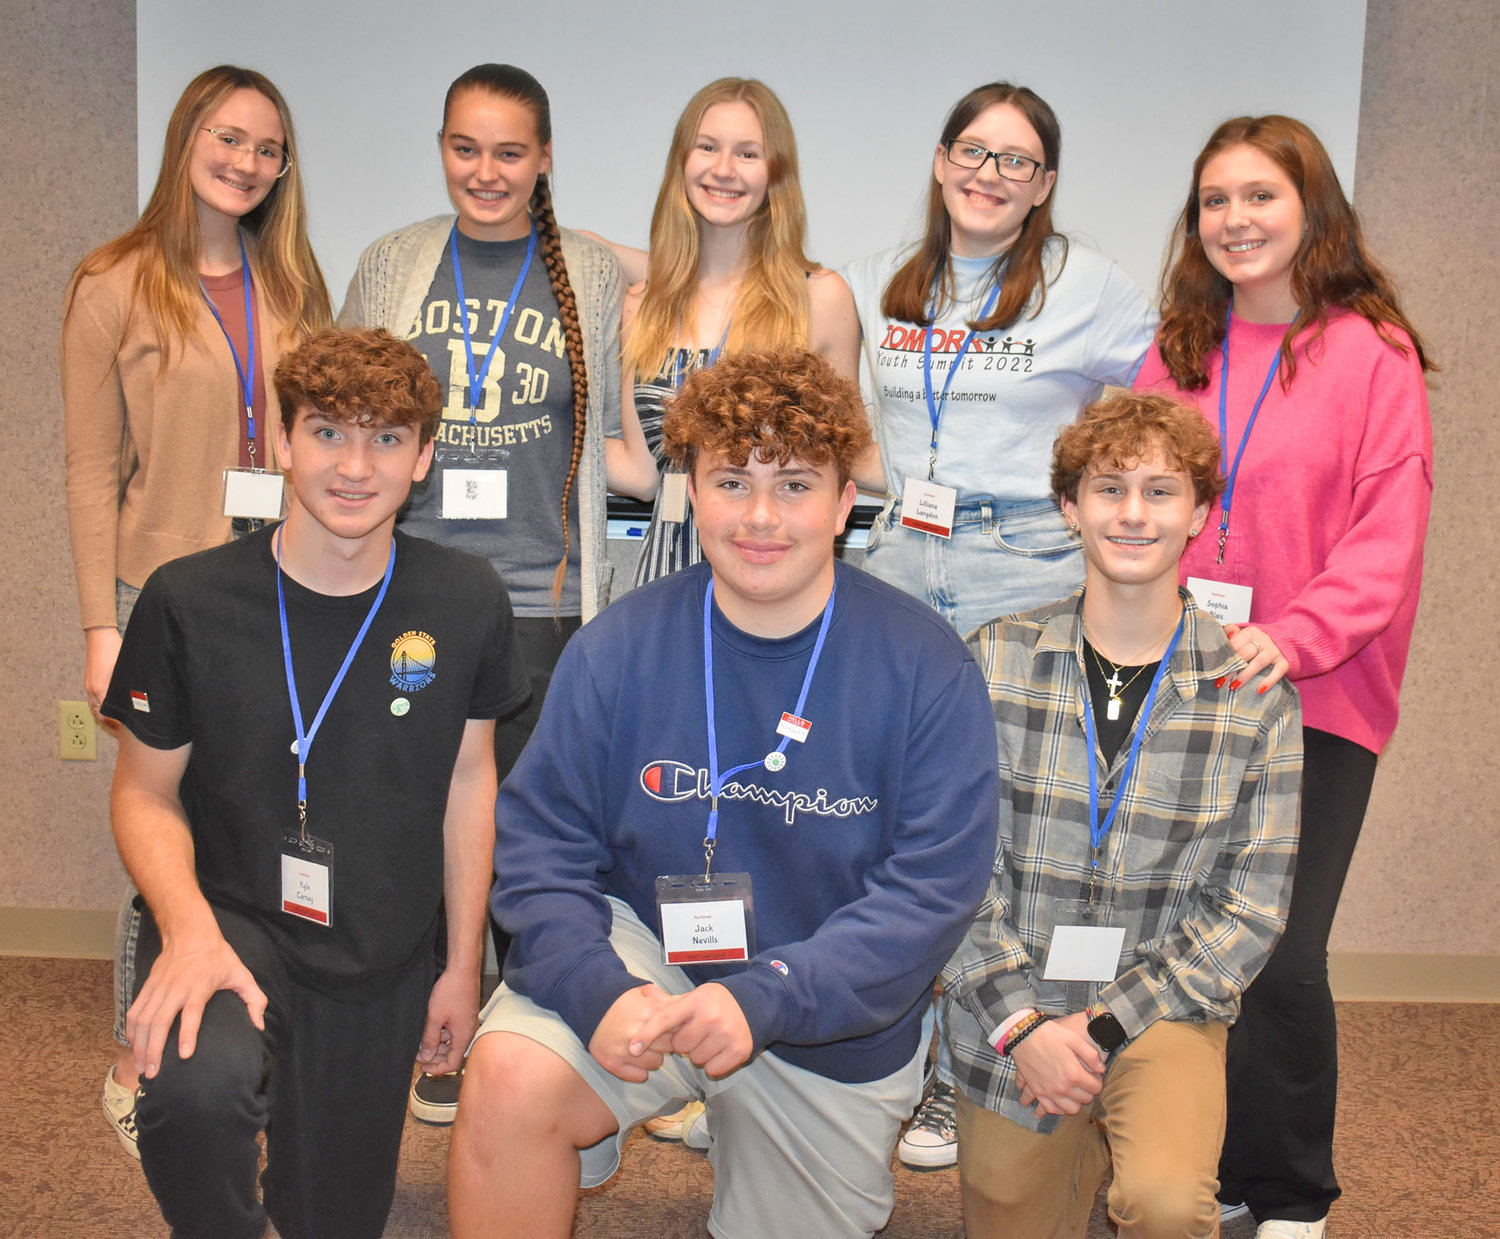 Herkimer Central School District students including, front row from left, Kyle Carney, Jack Nevills and Danny Bleaking and back row from left, Alyse Cannon, Victoria Staph, Madison Gargas, Lilliana Langdon and Sophia Bliss attended the 2022 Herkimer County Youth Summit Oct. 26 at Herkimer College.